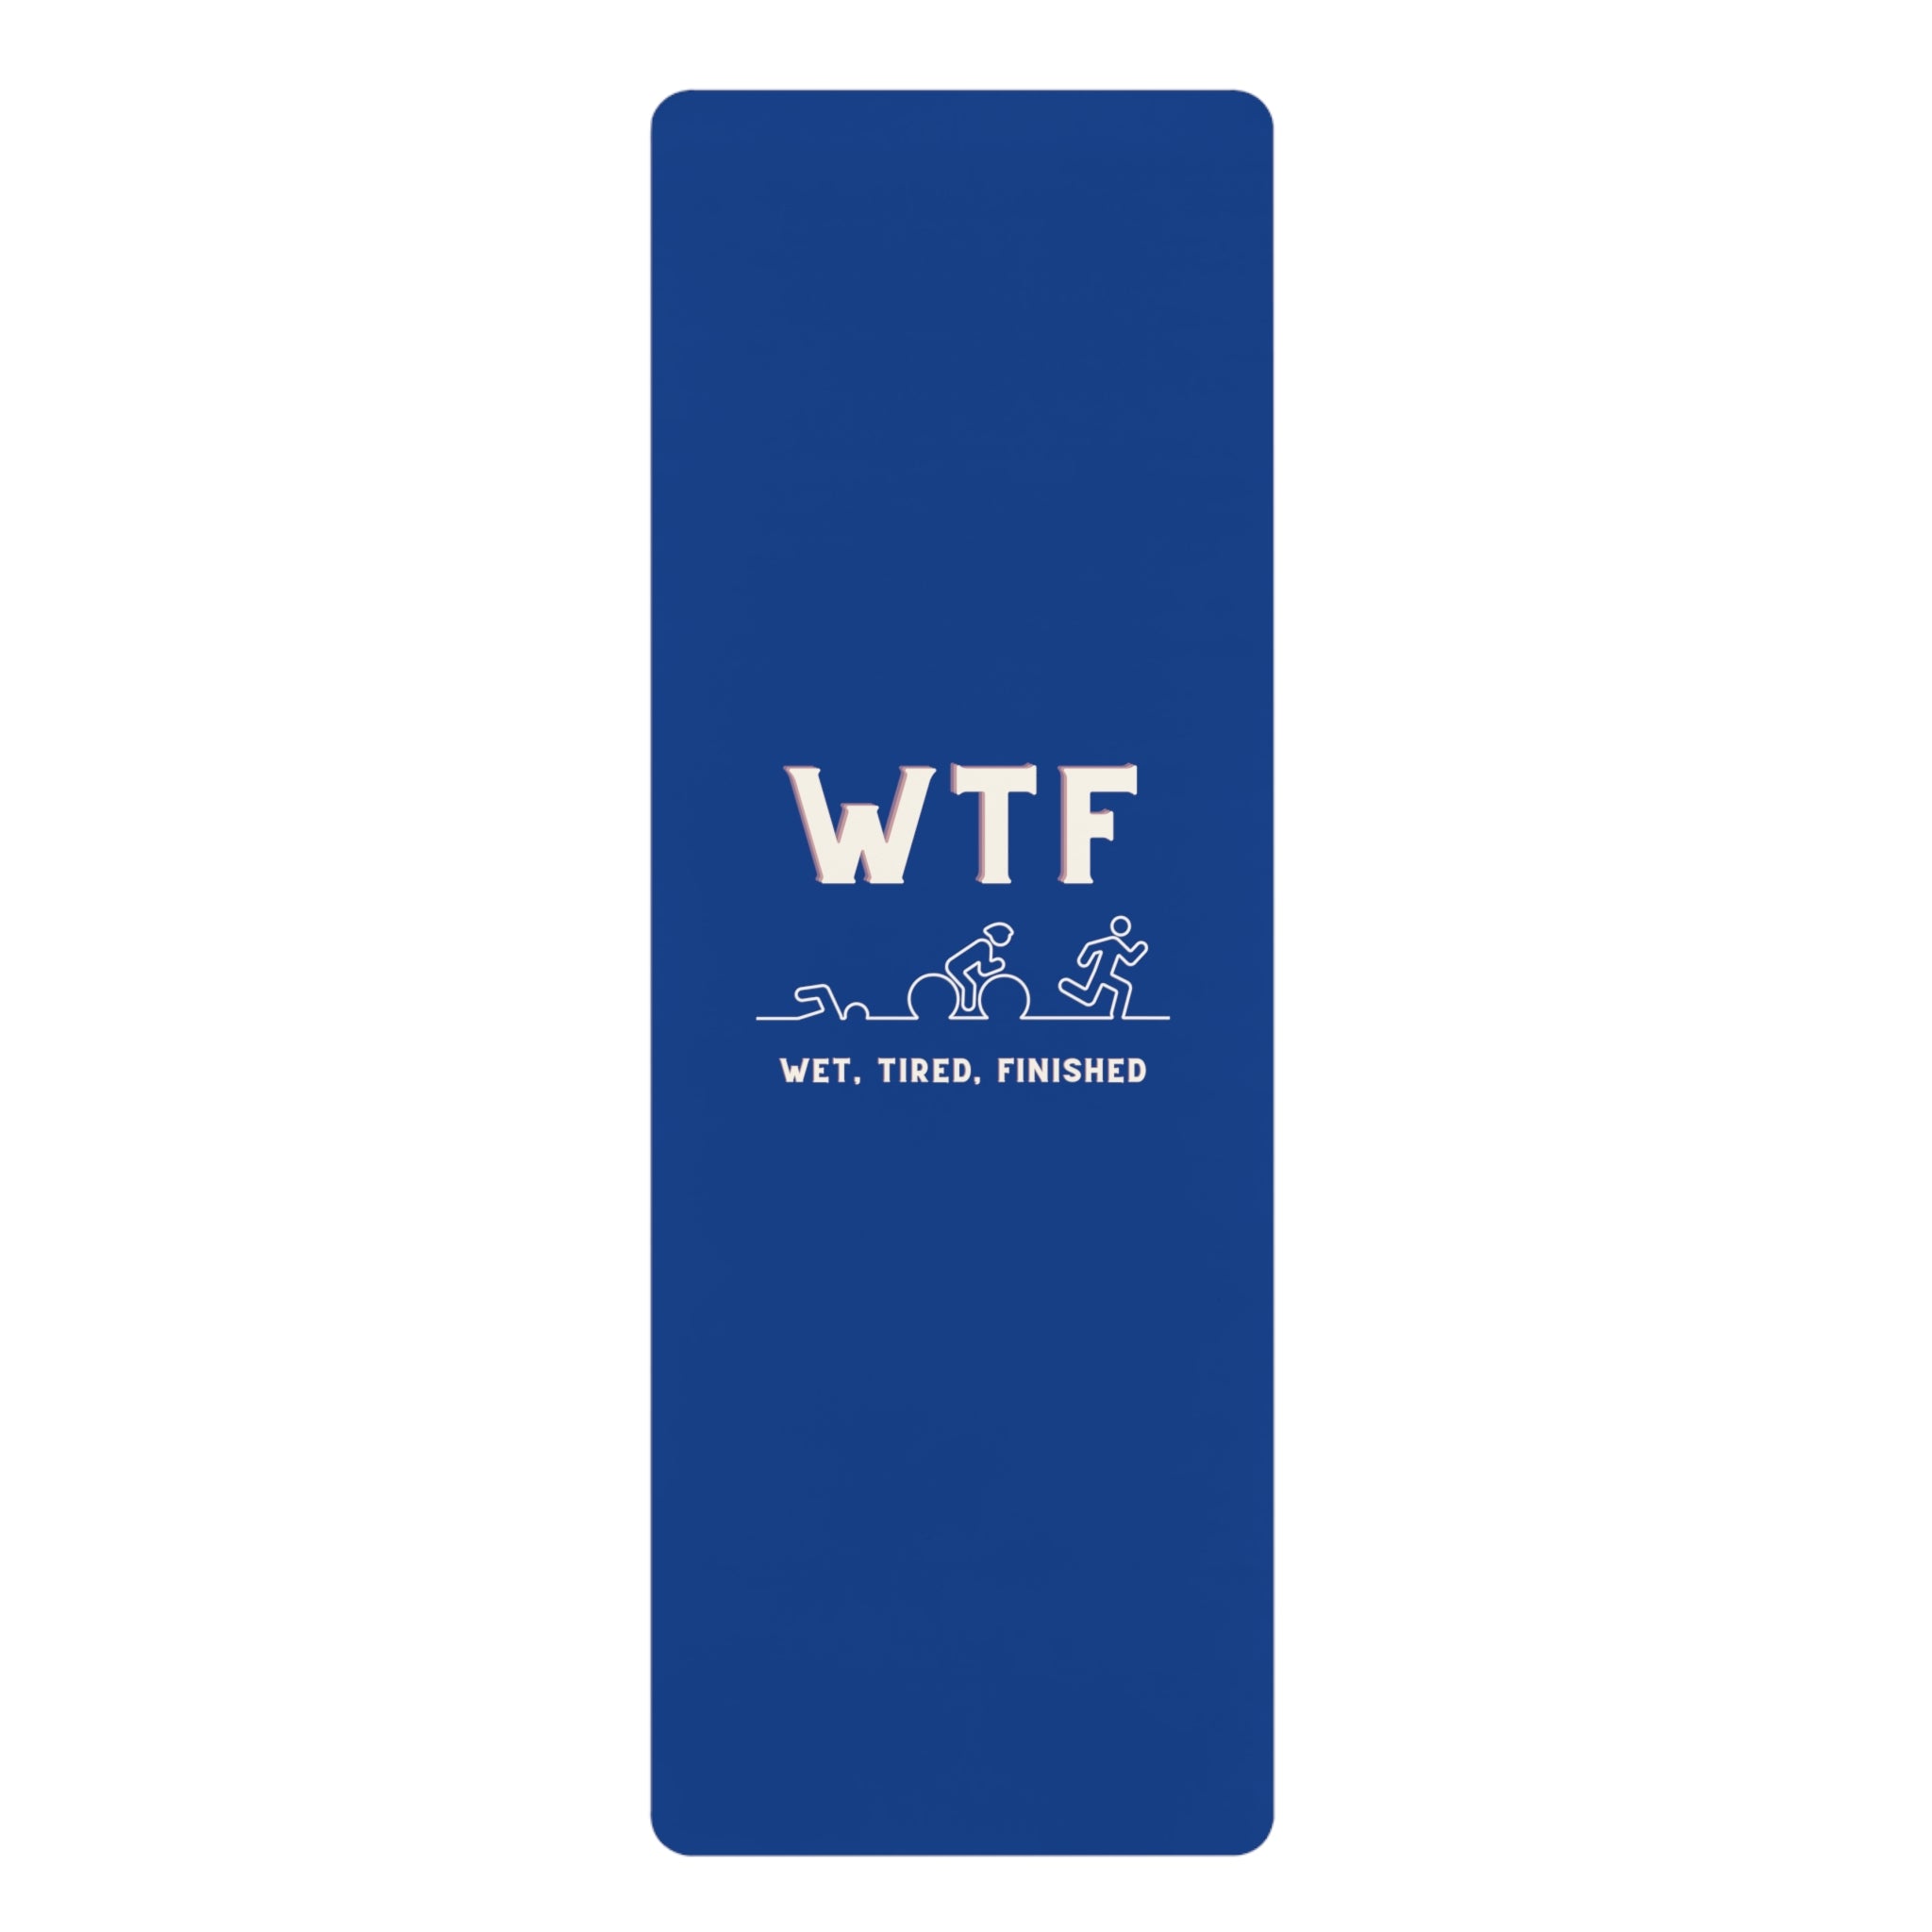 Rubber Yoga Mat: WTF - The Ultimate Triathlete's Journey